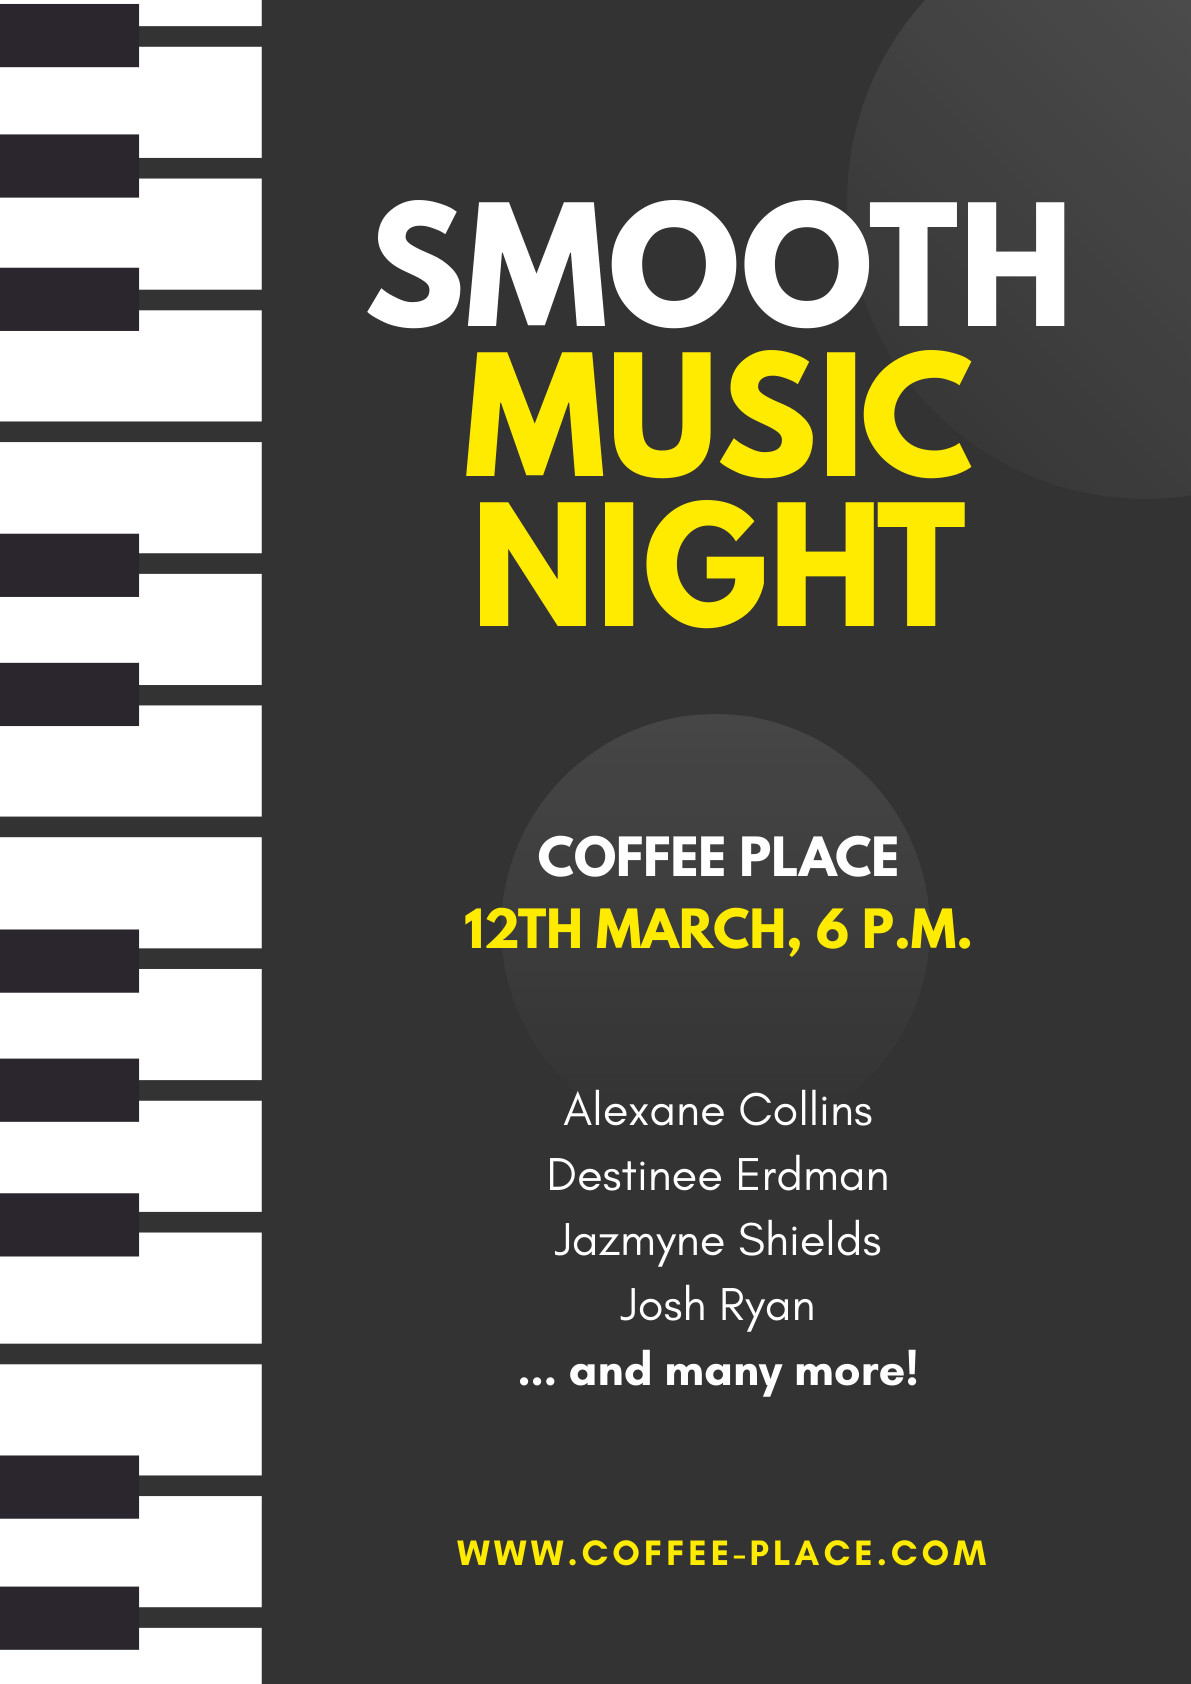 Smooth Music Night – Poster Template 1191x1684